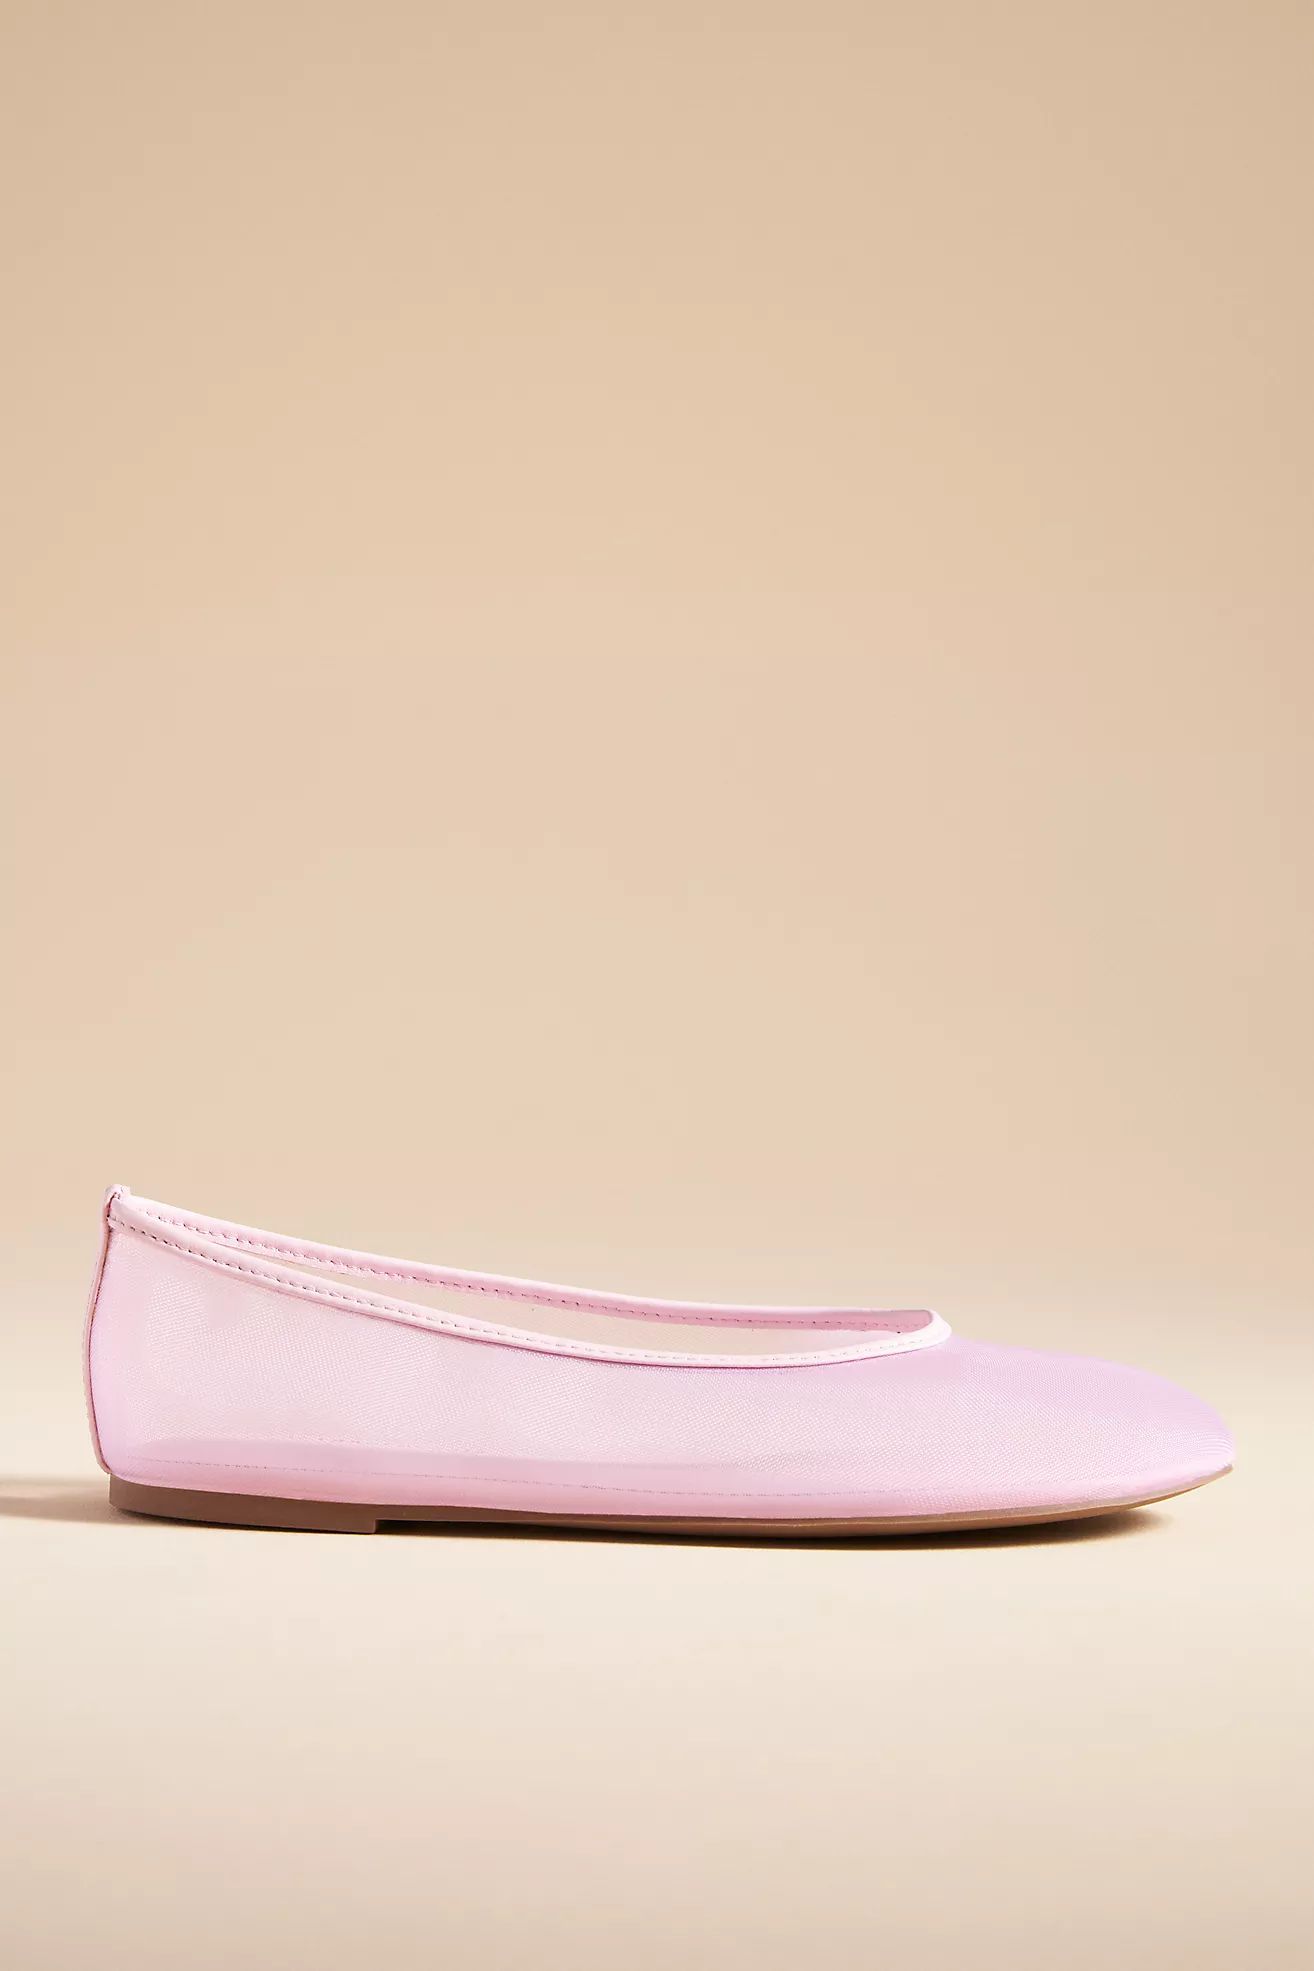 By Anthropologie Mesh Ballet Flats | Anthropologie (US)